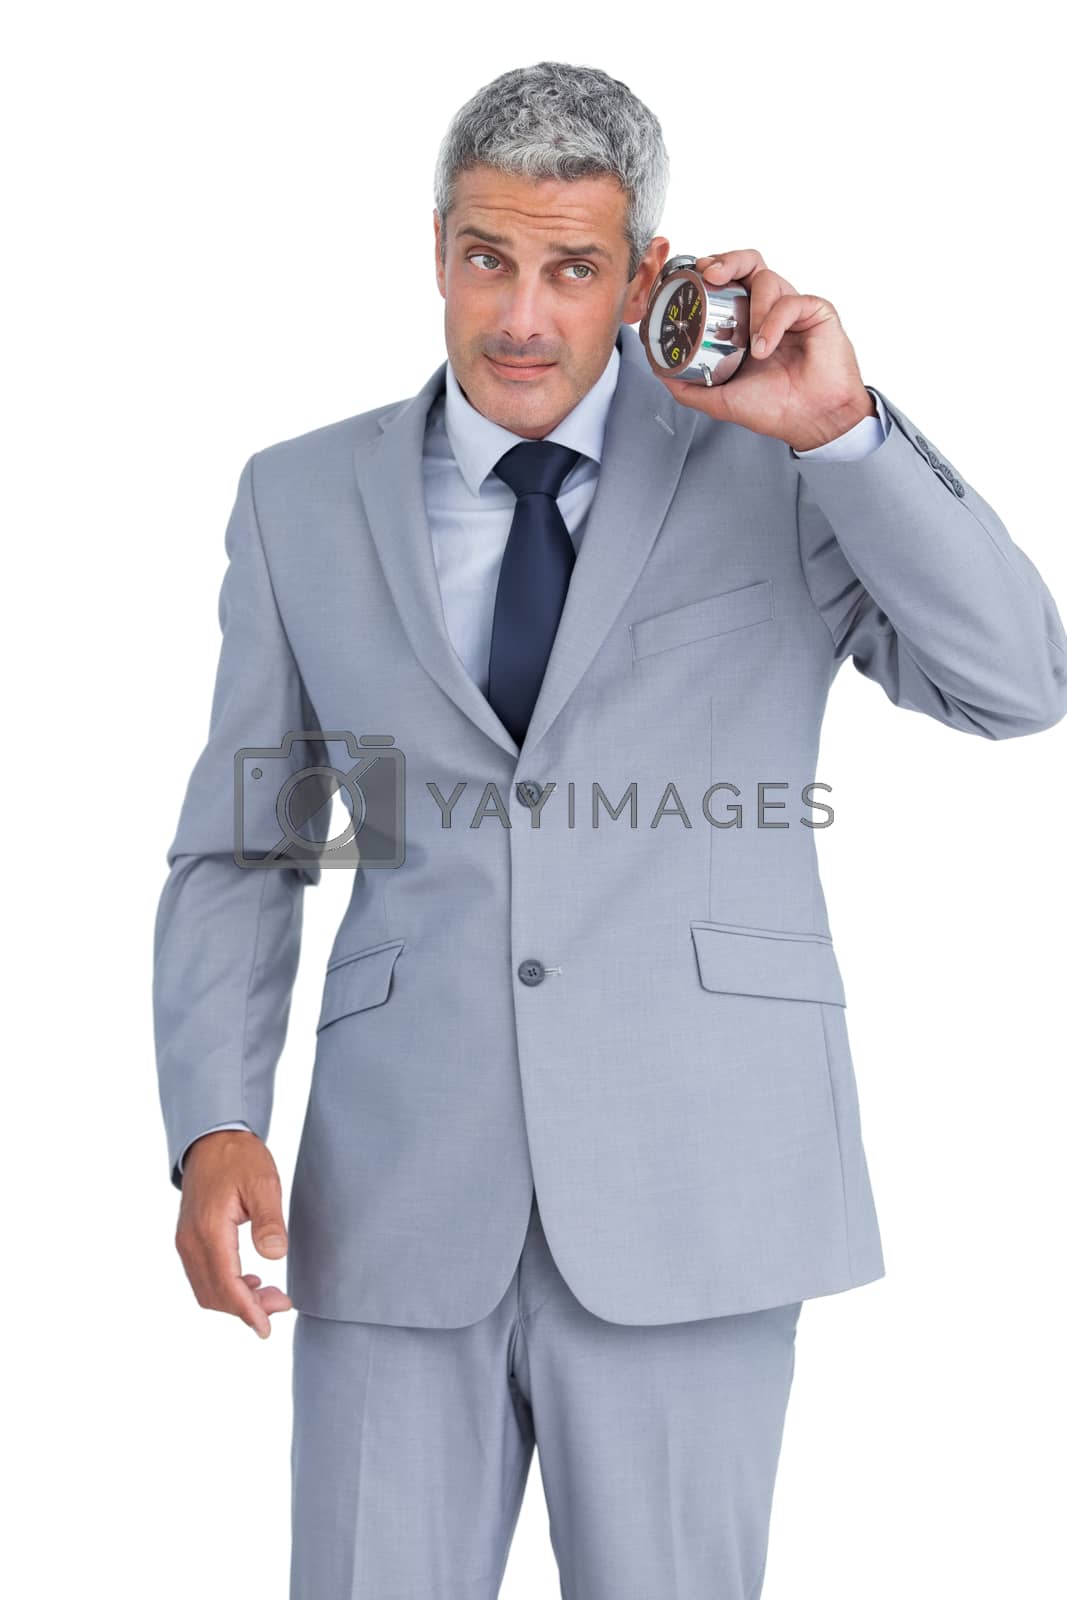 Royalty free image of Concerned businessman with alarm clock  by Wavebreakmedia